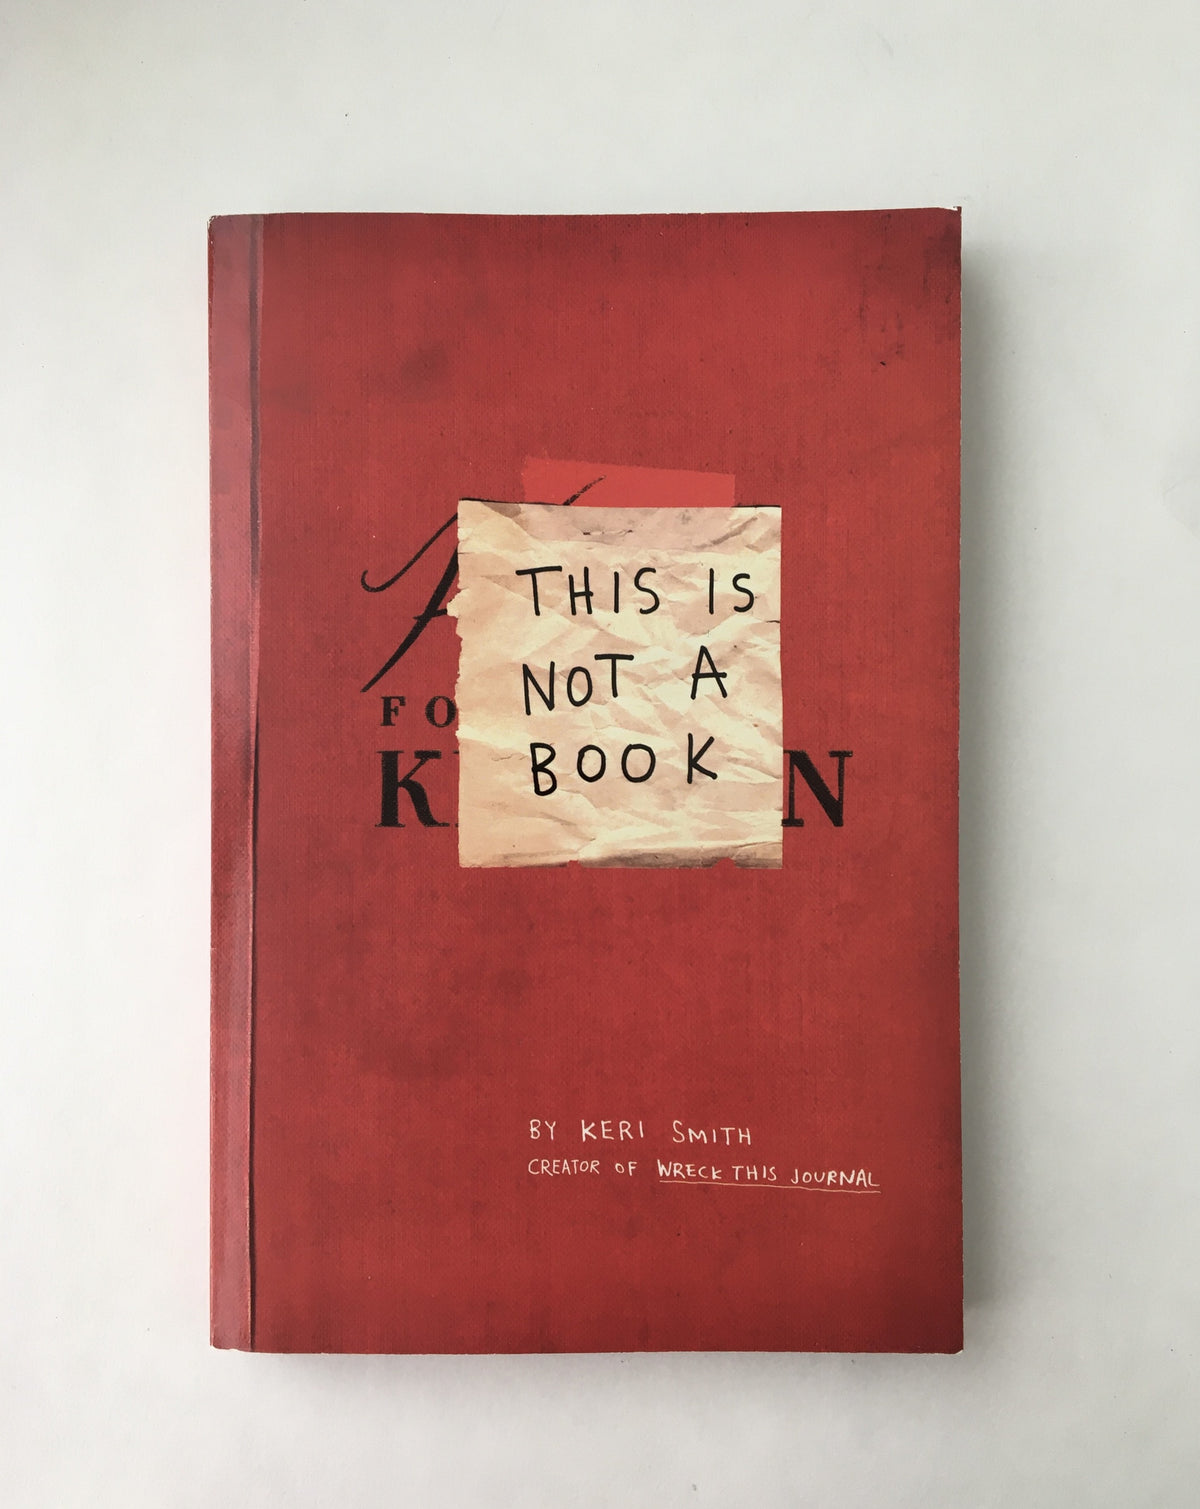 This is Not a Book by Keri Smith